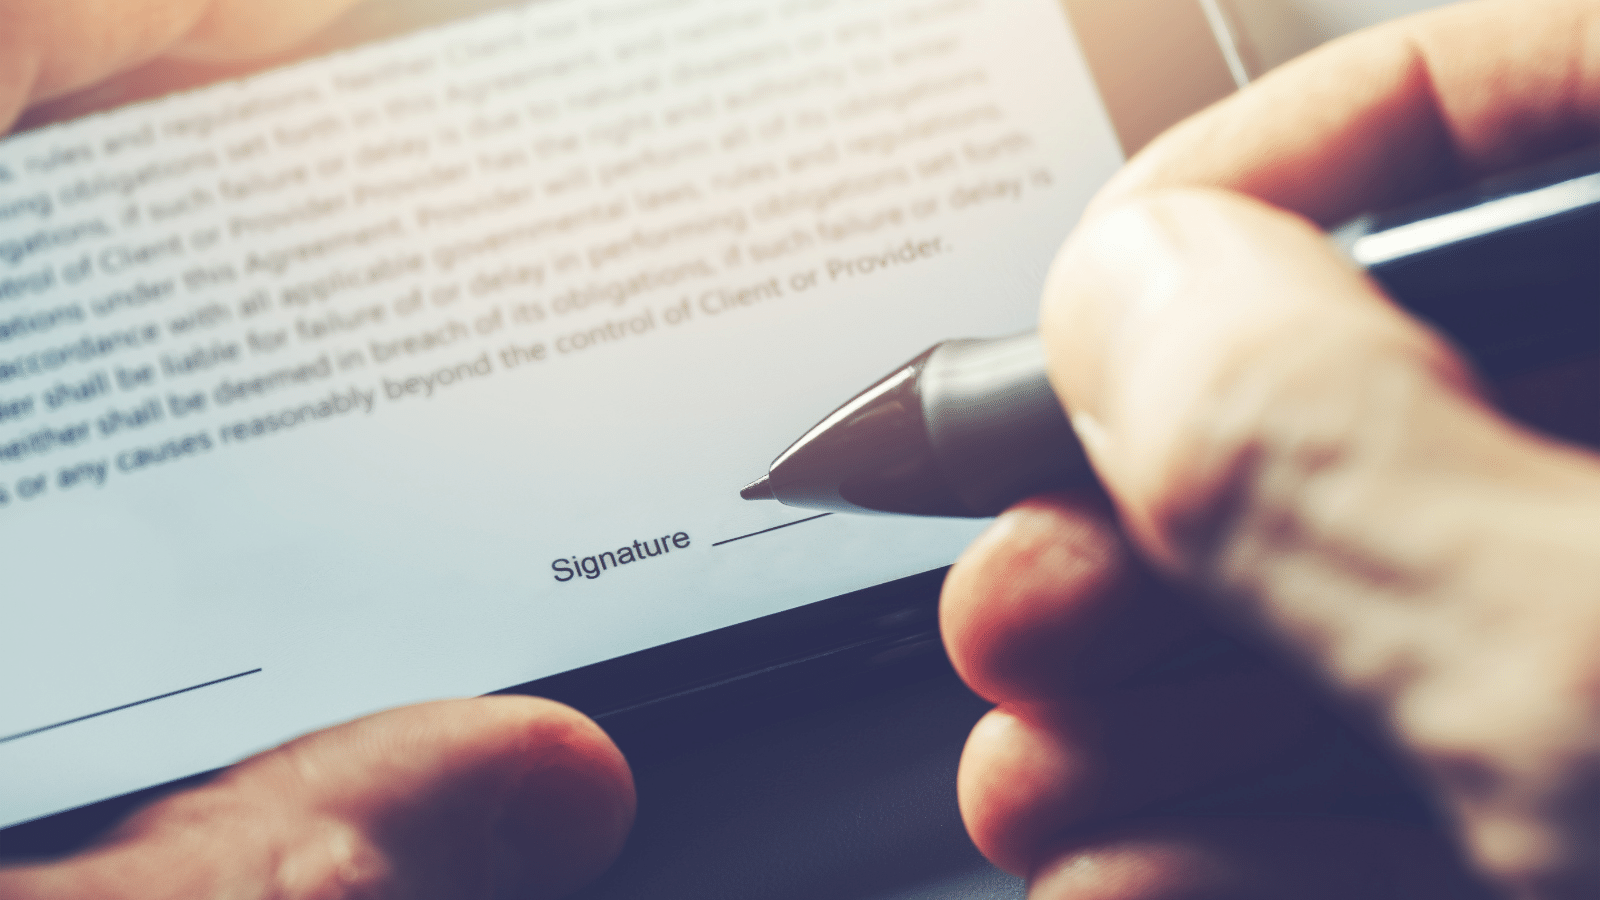 How to use electronic signatures in regulated industries - Quality by Design